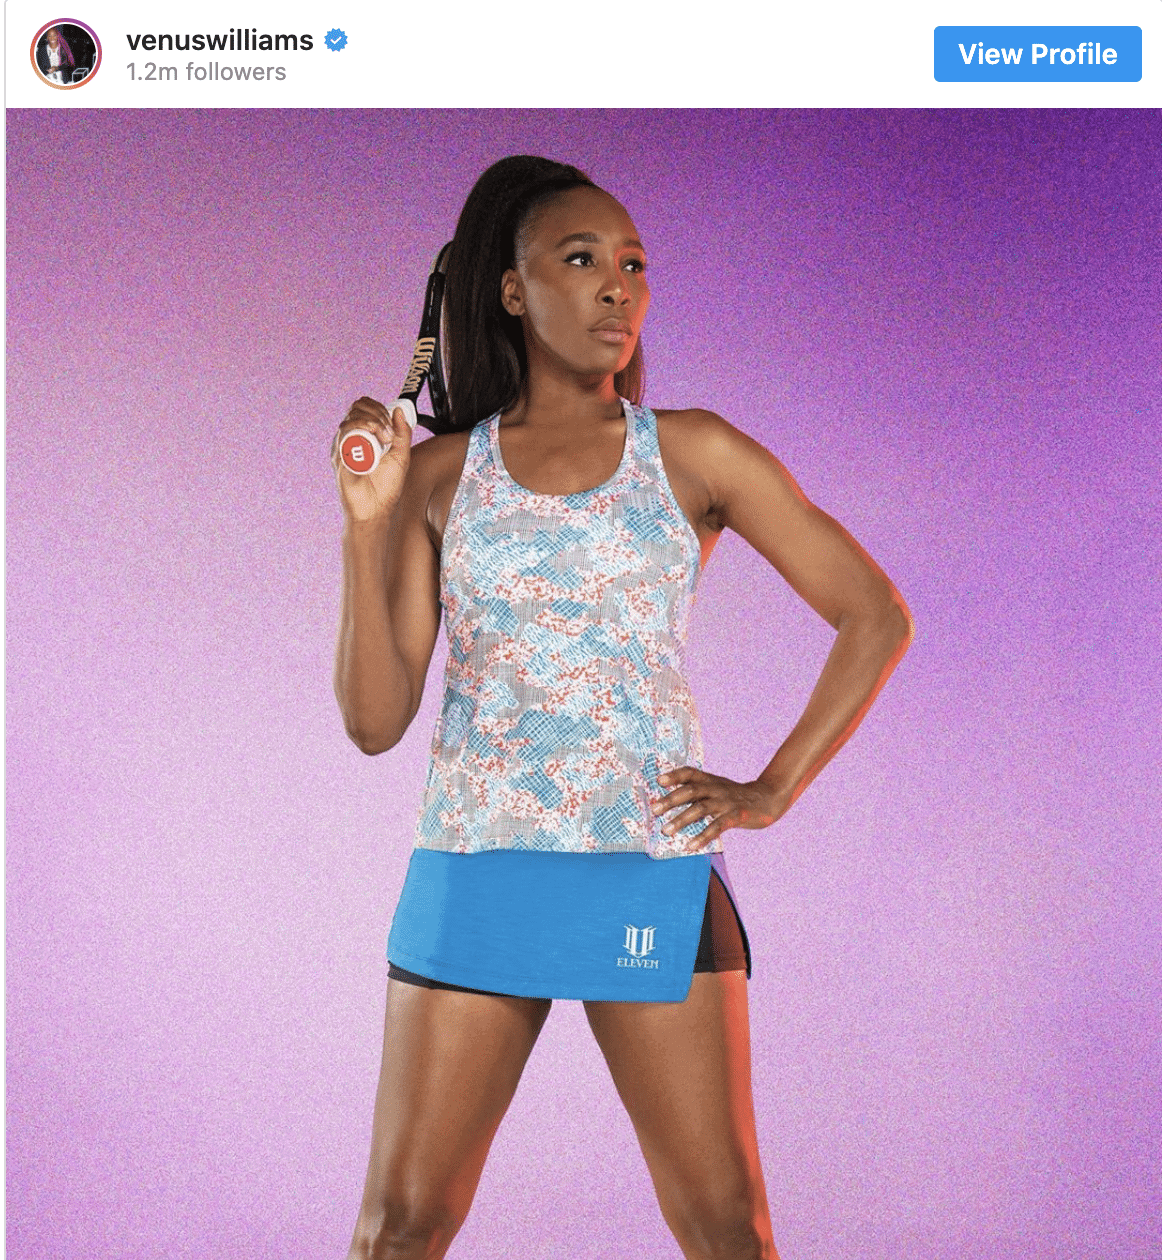 Tennis pro Venus Williams holding a tennis racket standing in front of a purple background.